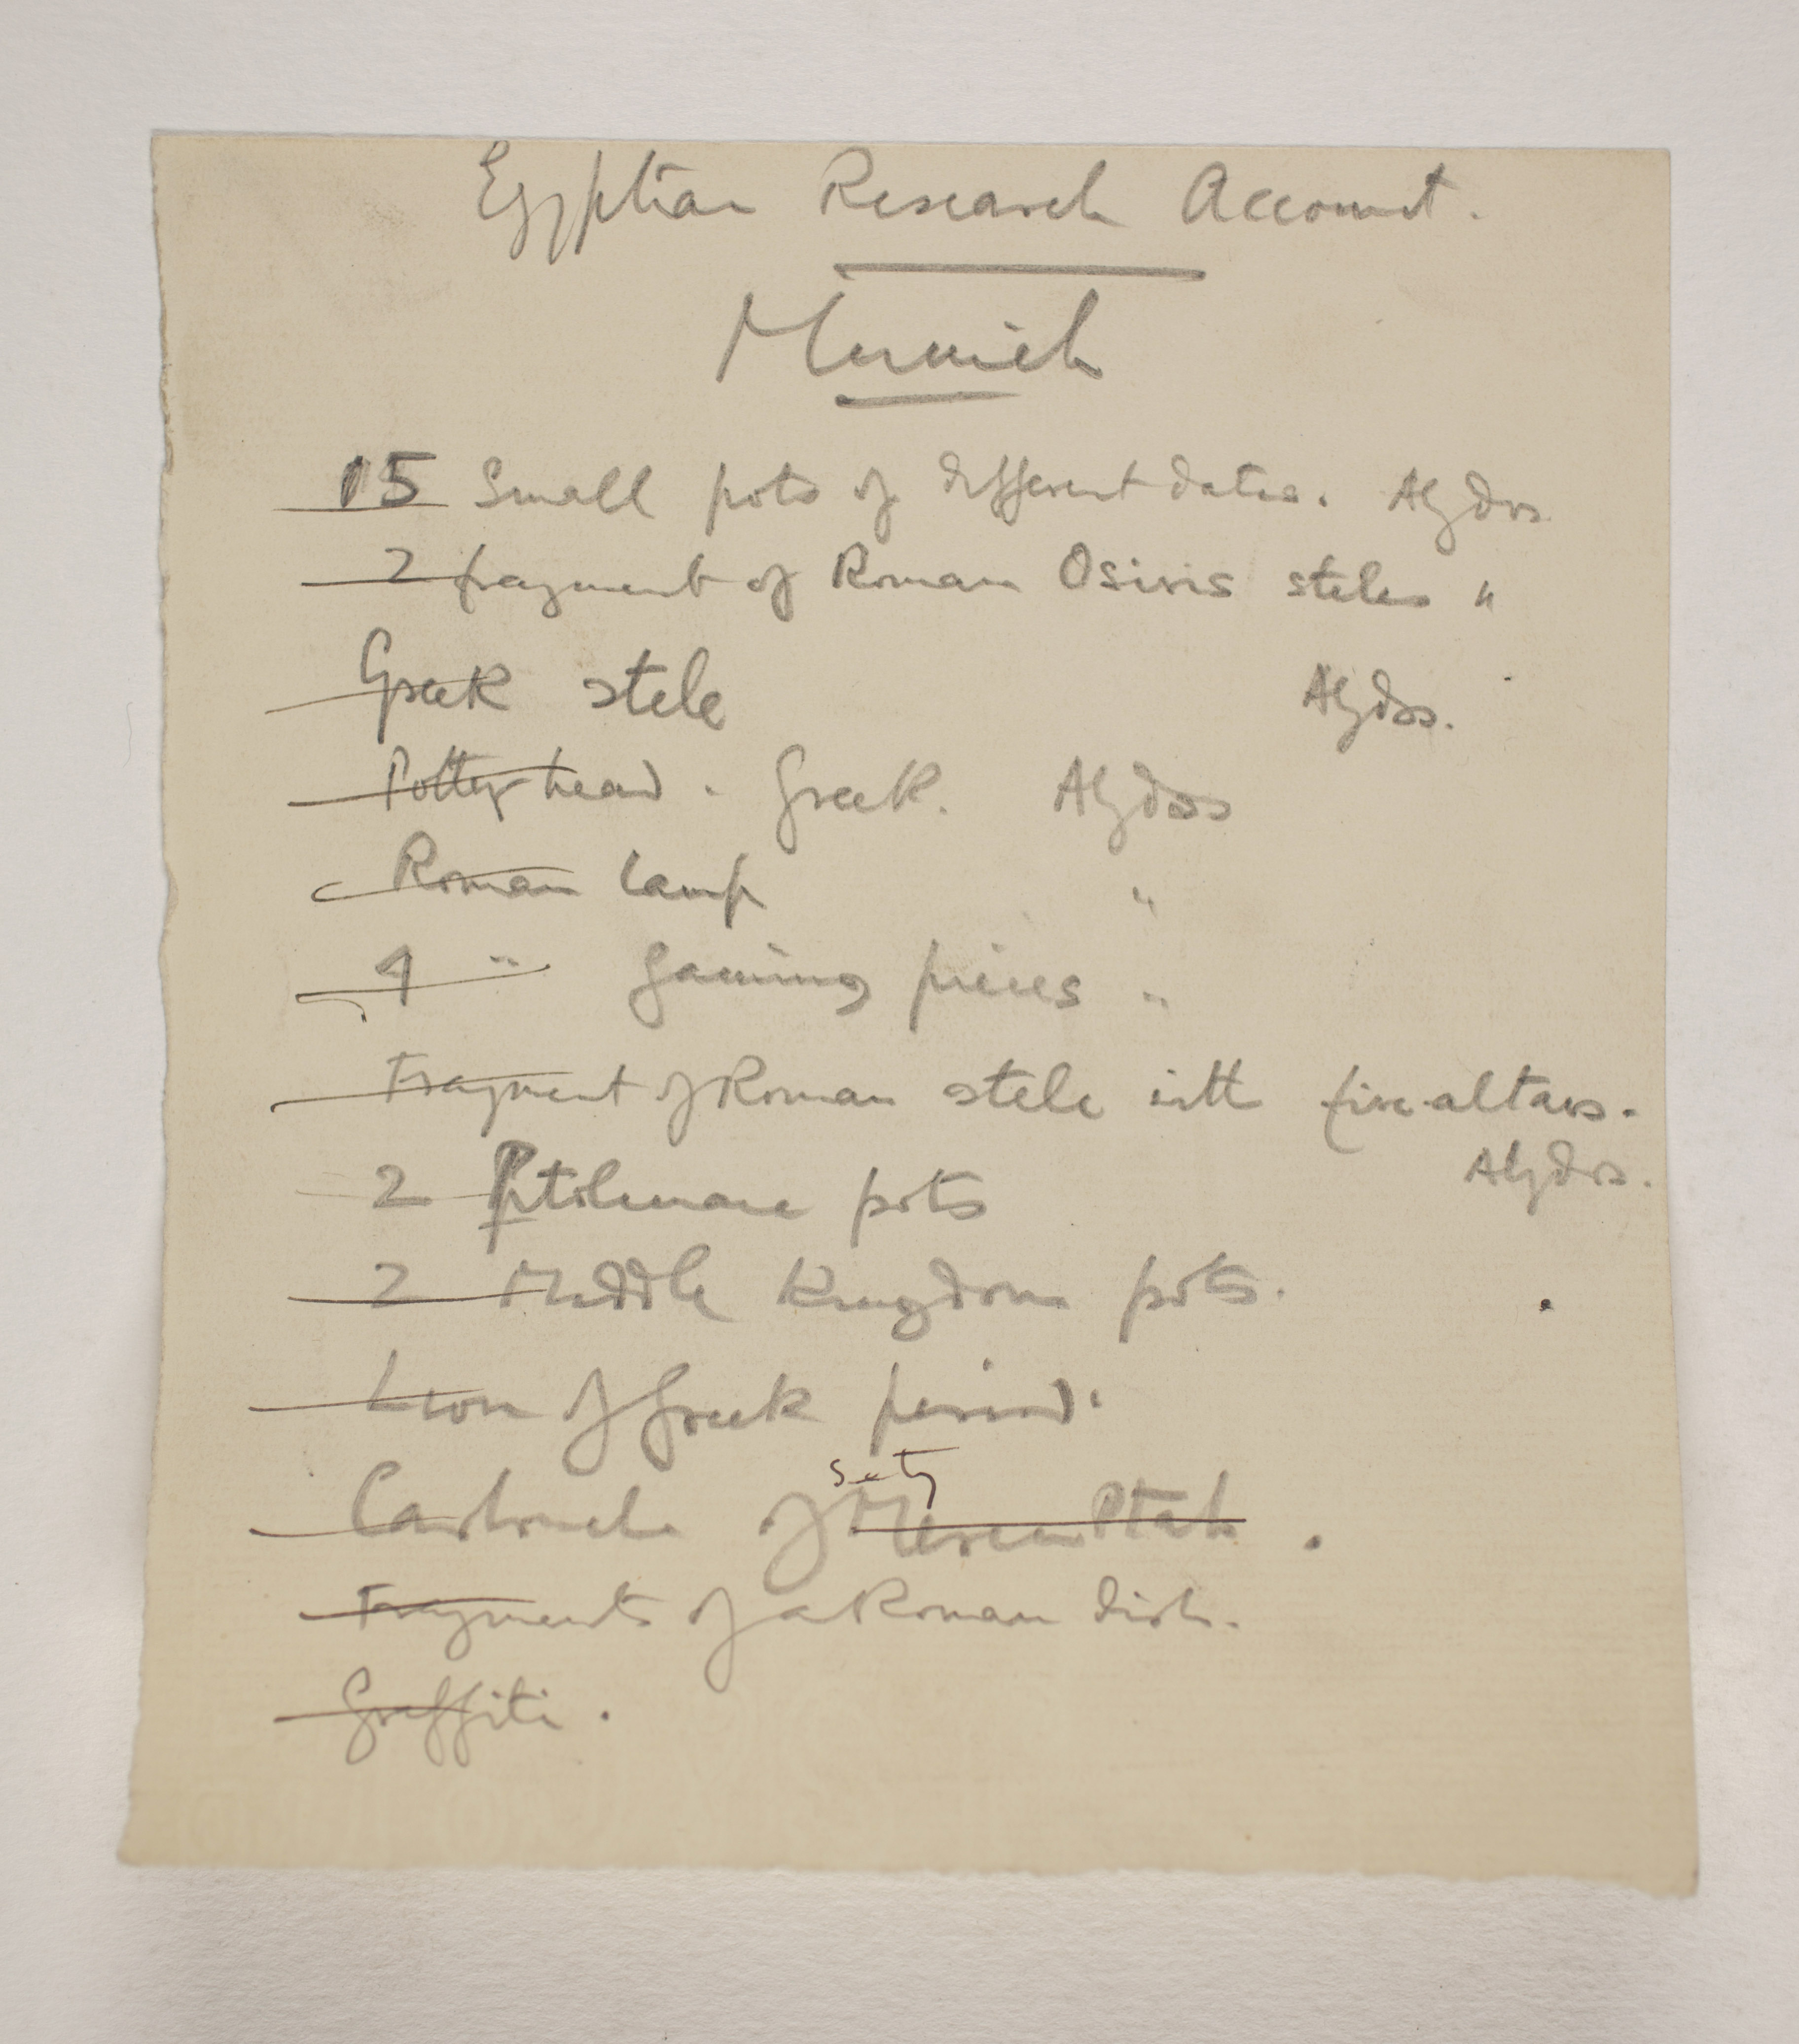 1902-03 Abydos Individual institution list  PMA/WFP1/D/11/40